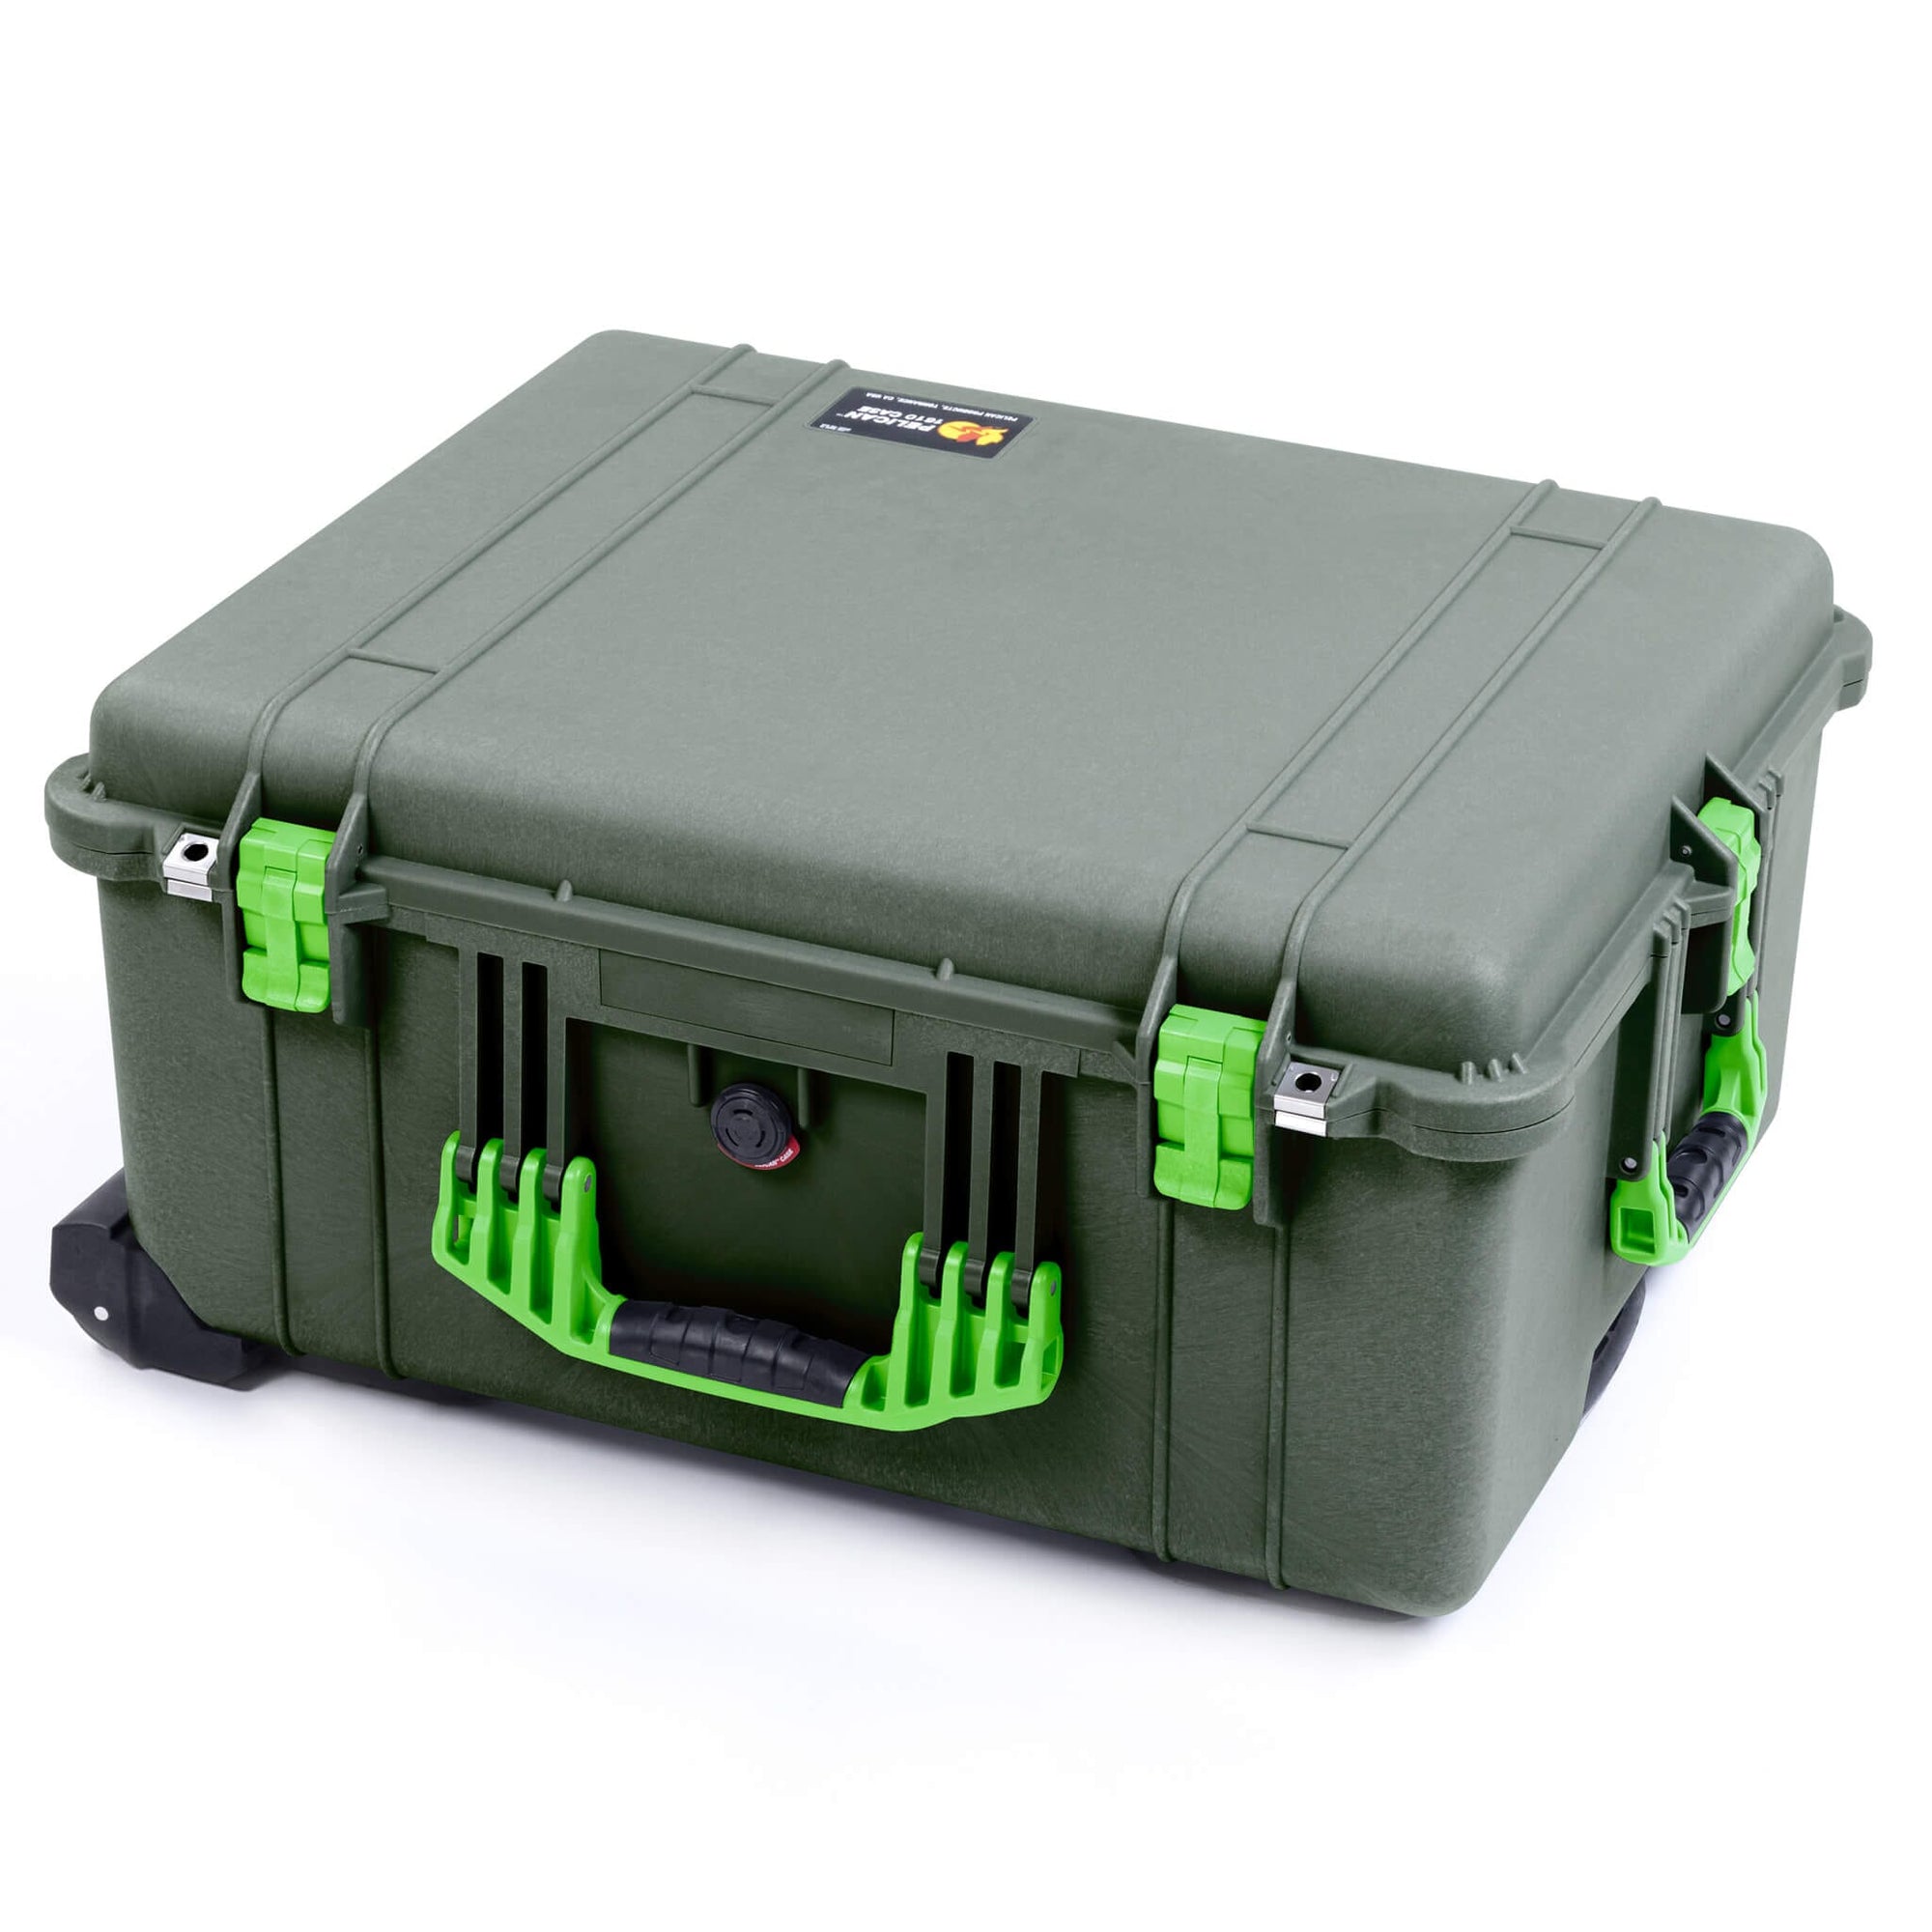 Pelican 1610 Case, OD Green with Lime Green Handles and Latches ColorCase 